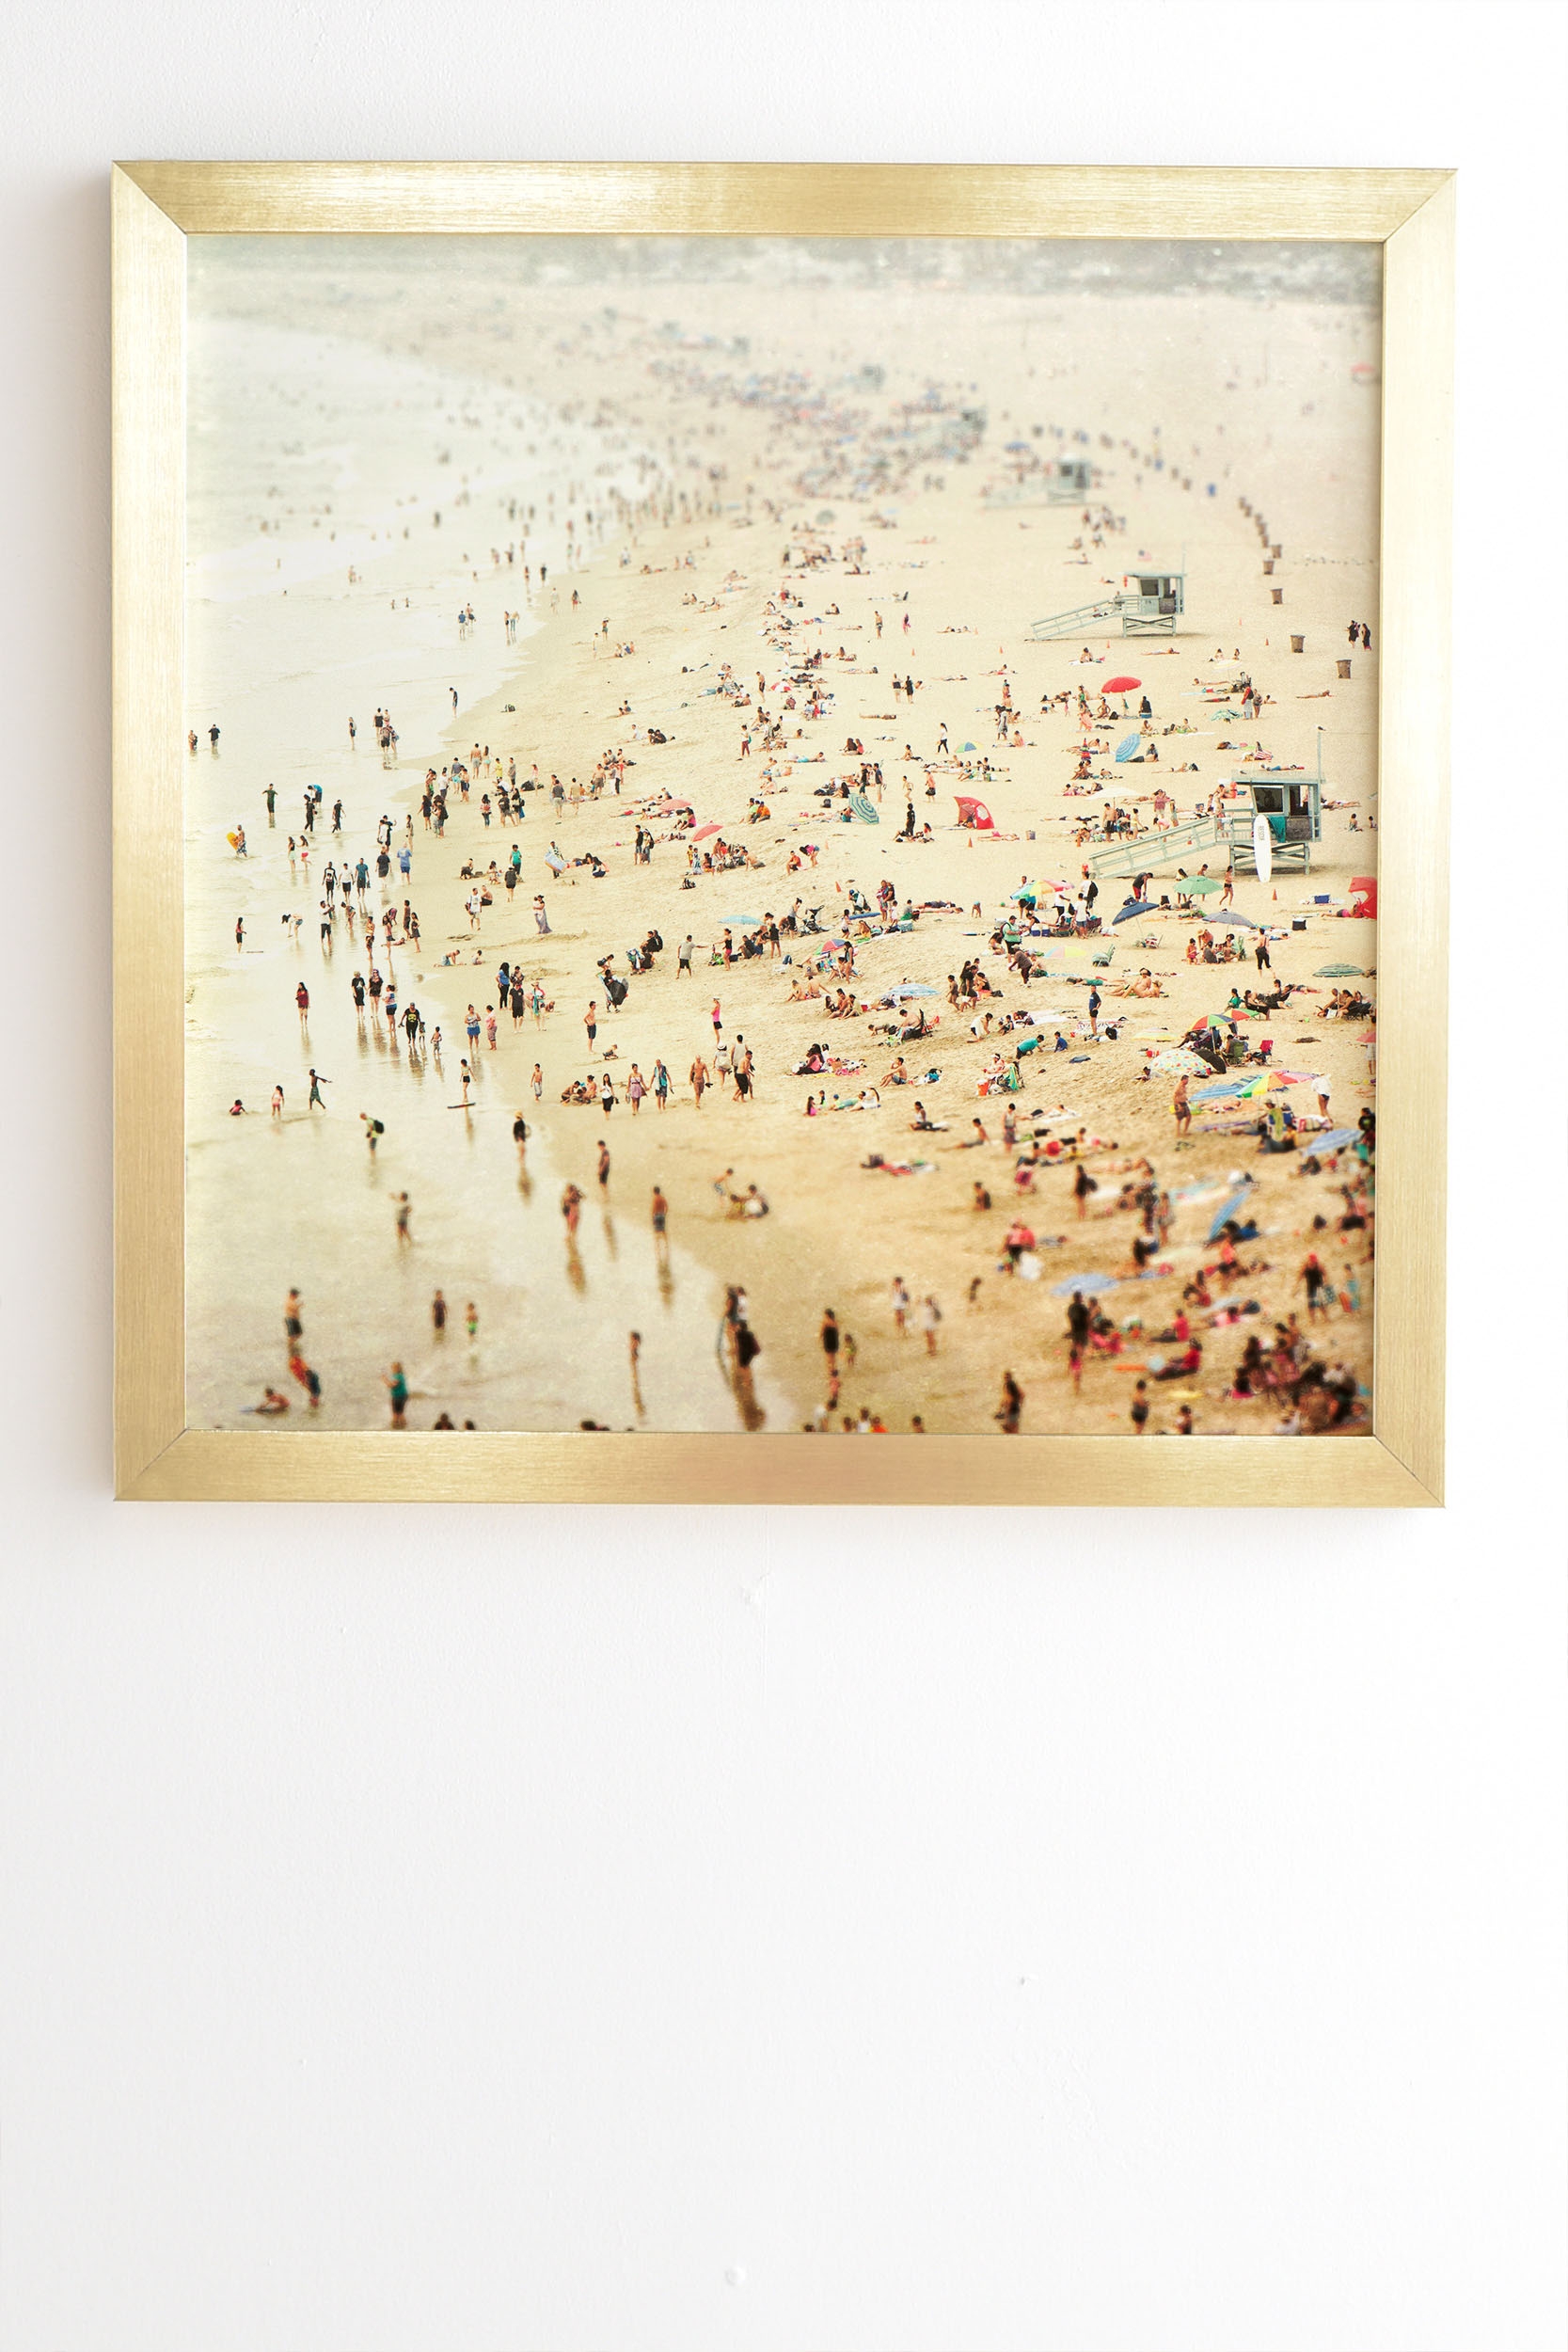 In The Crowd by Bree Madden - Framed Wall Art Basic Gold 30" x 30" - Image 1